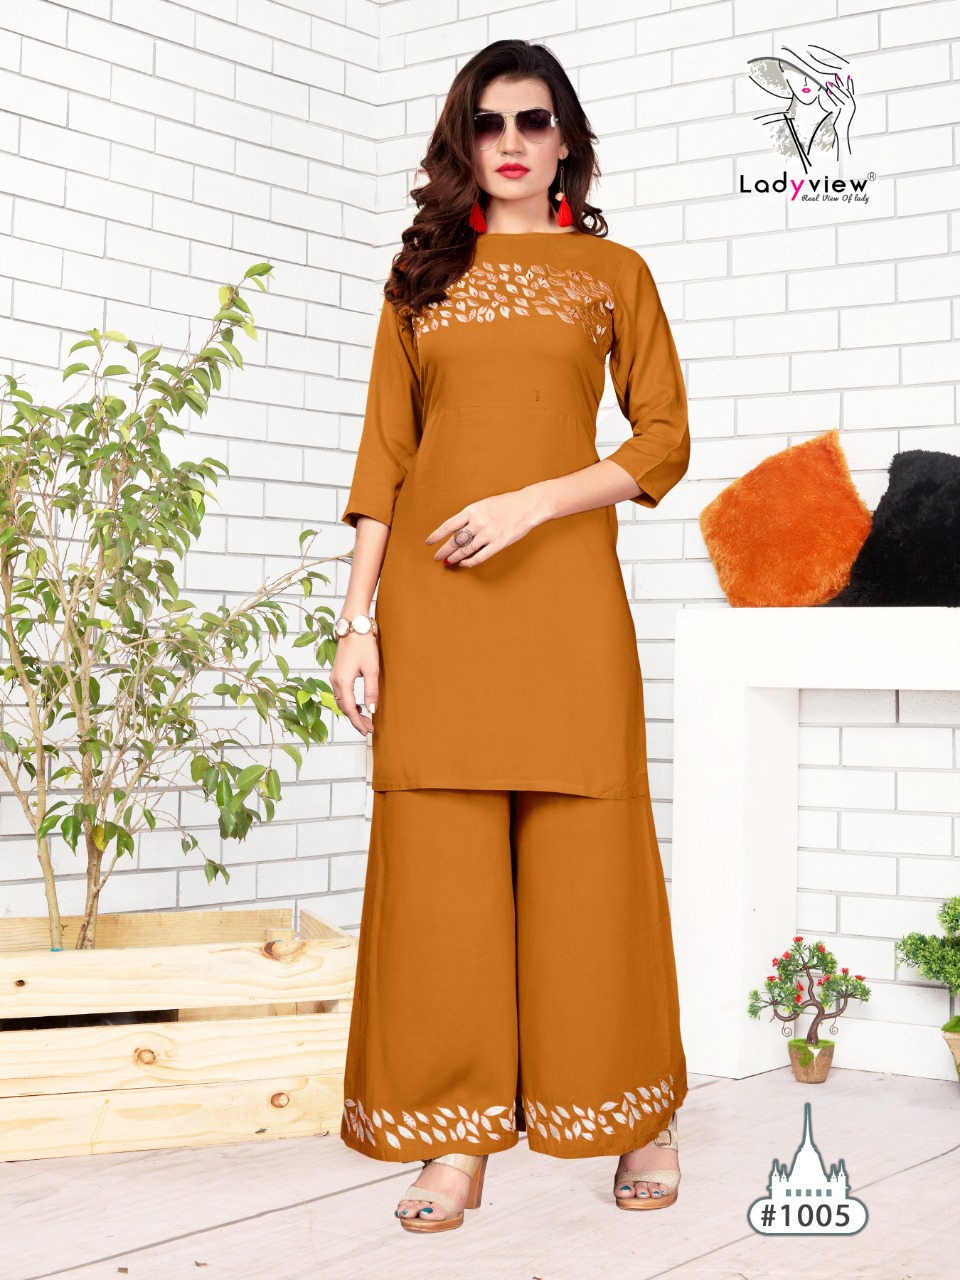 Ladyview Plazzo Point Catalogue Fancy Rayon Party Wear Kurtis With Plazzo Collection Wholesale Surat